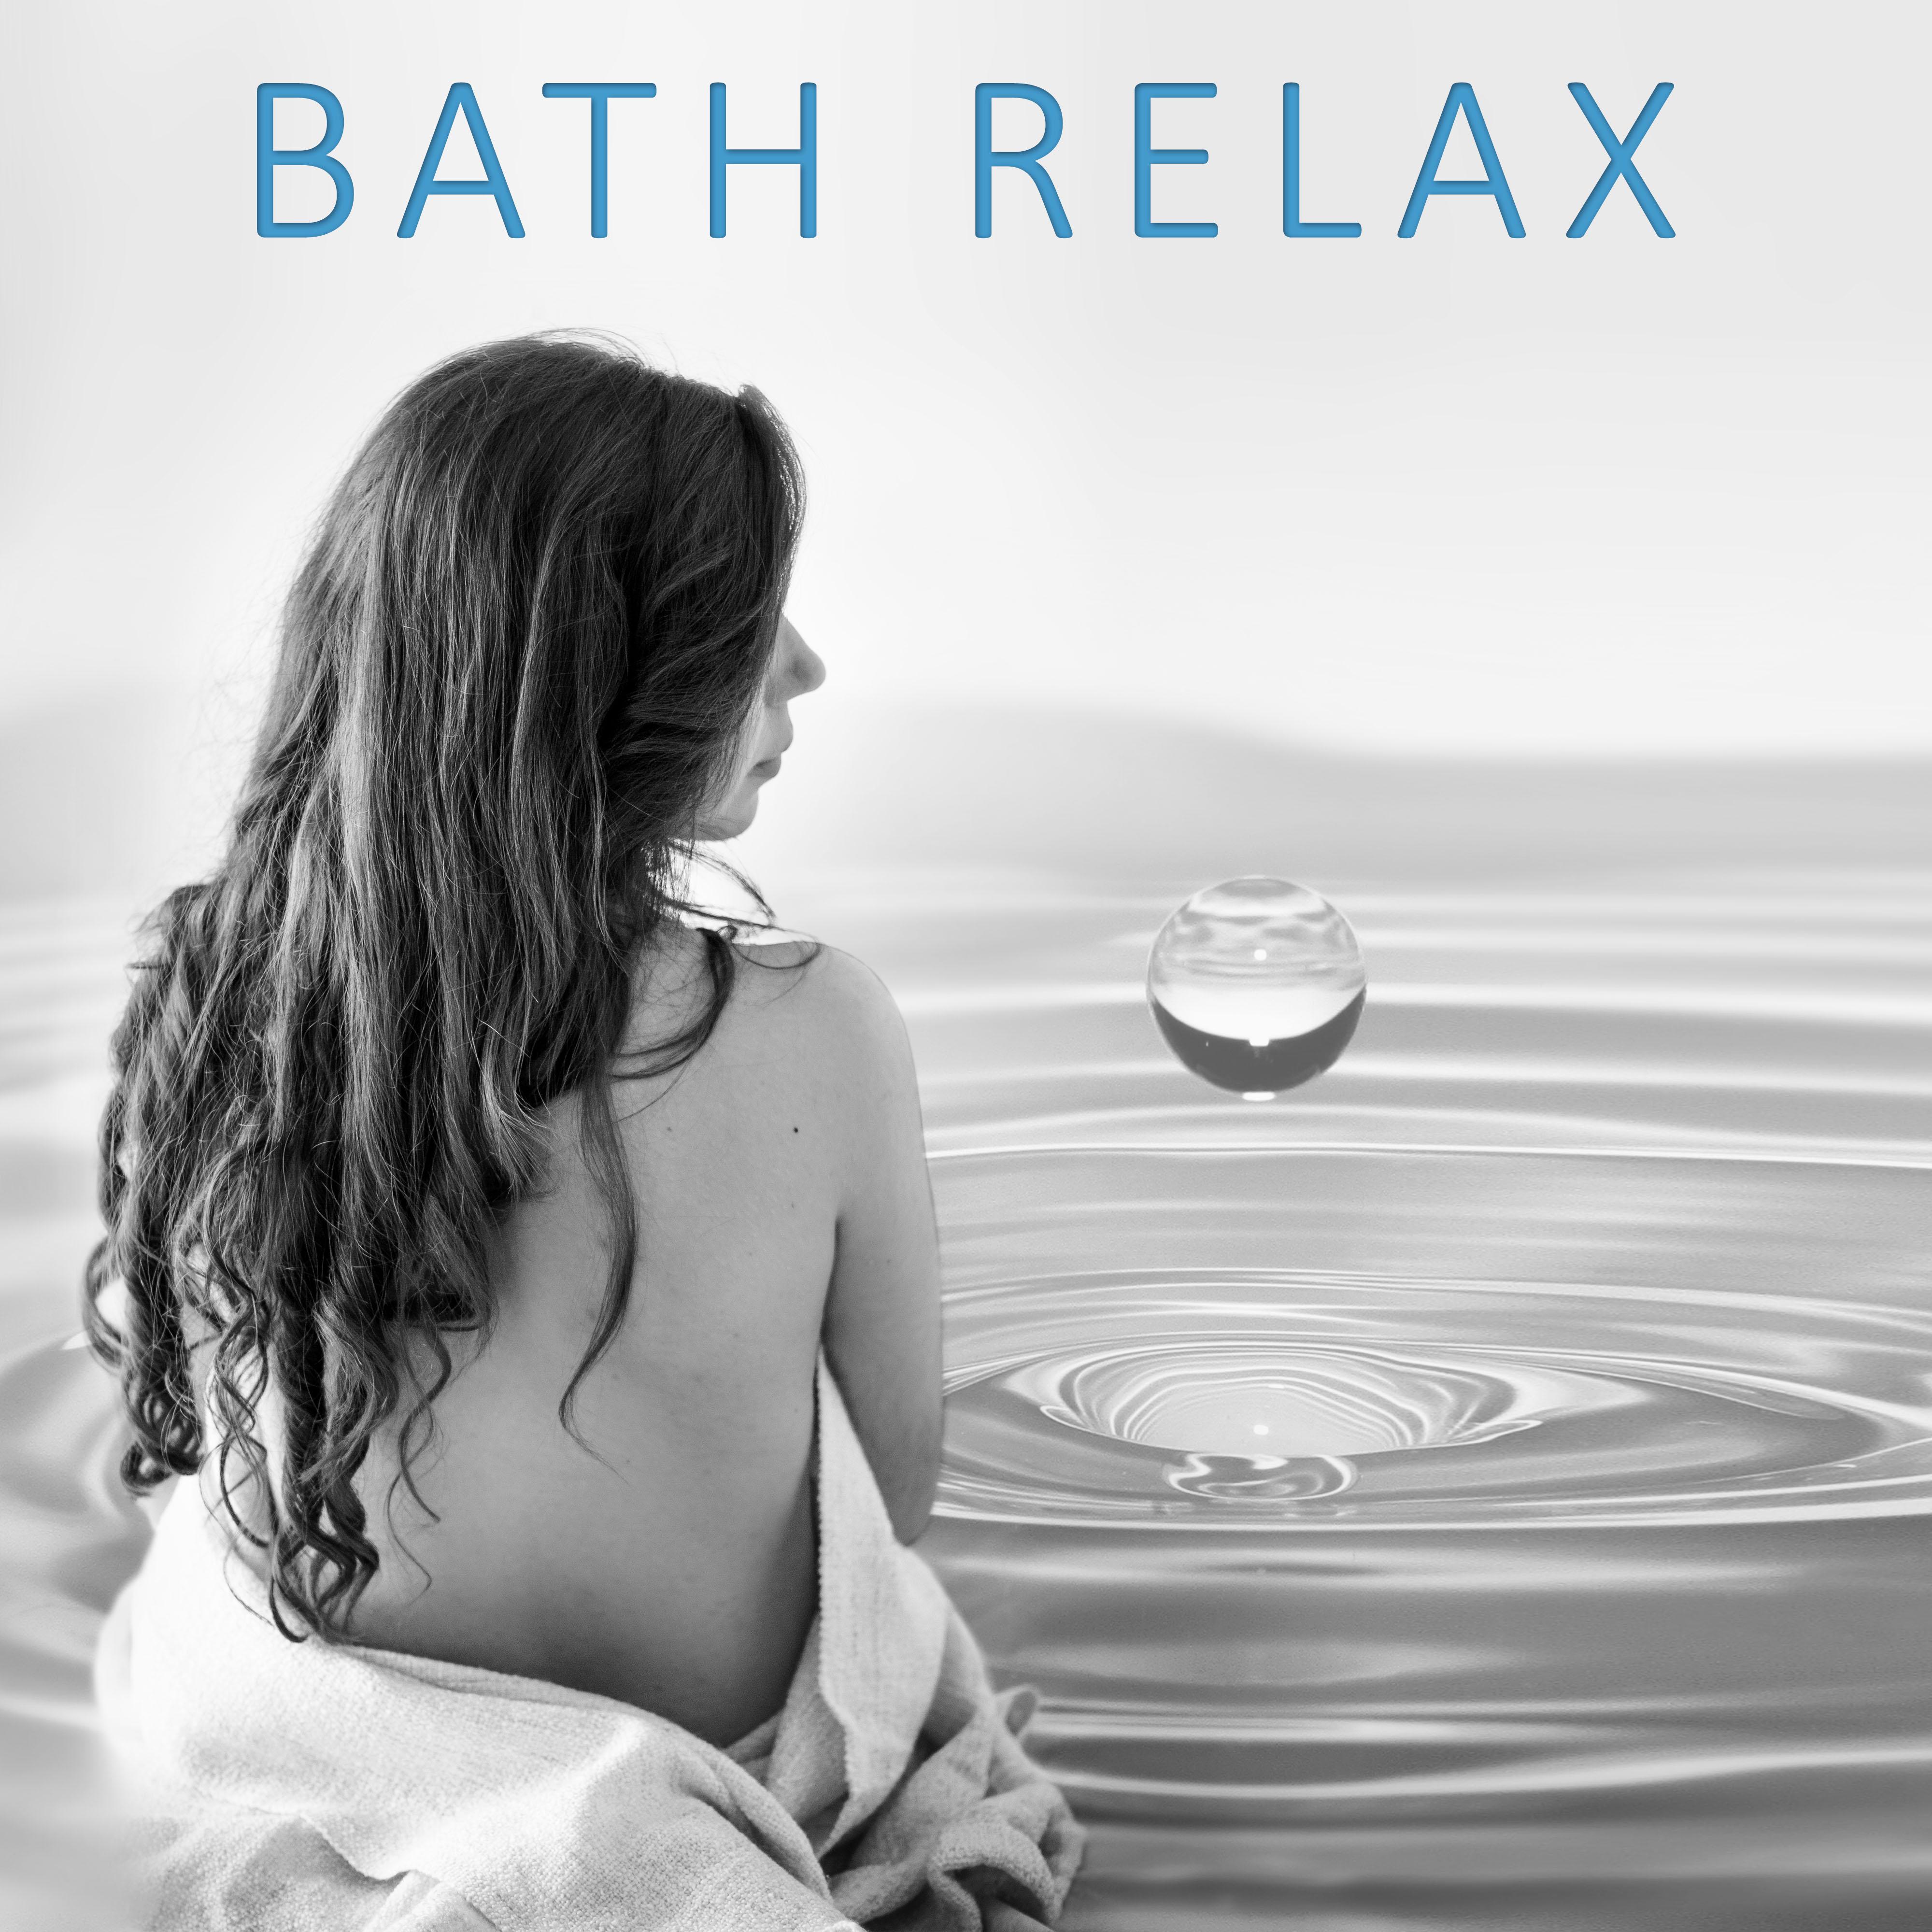 Bath Relax  New Age Music for Spa, Bath Time, Sounds of Nature, Relaxation, Massage, Welllness and Sleep, Sound Therapy